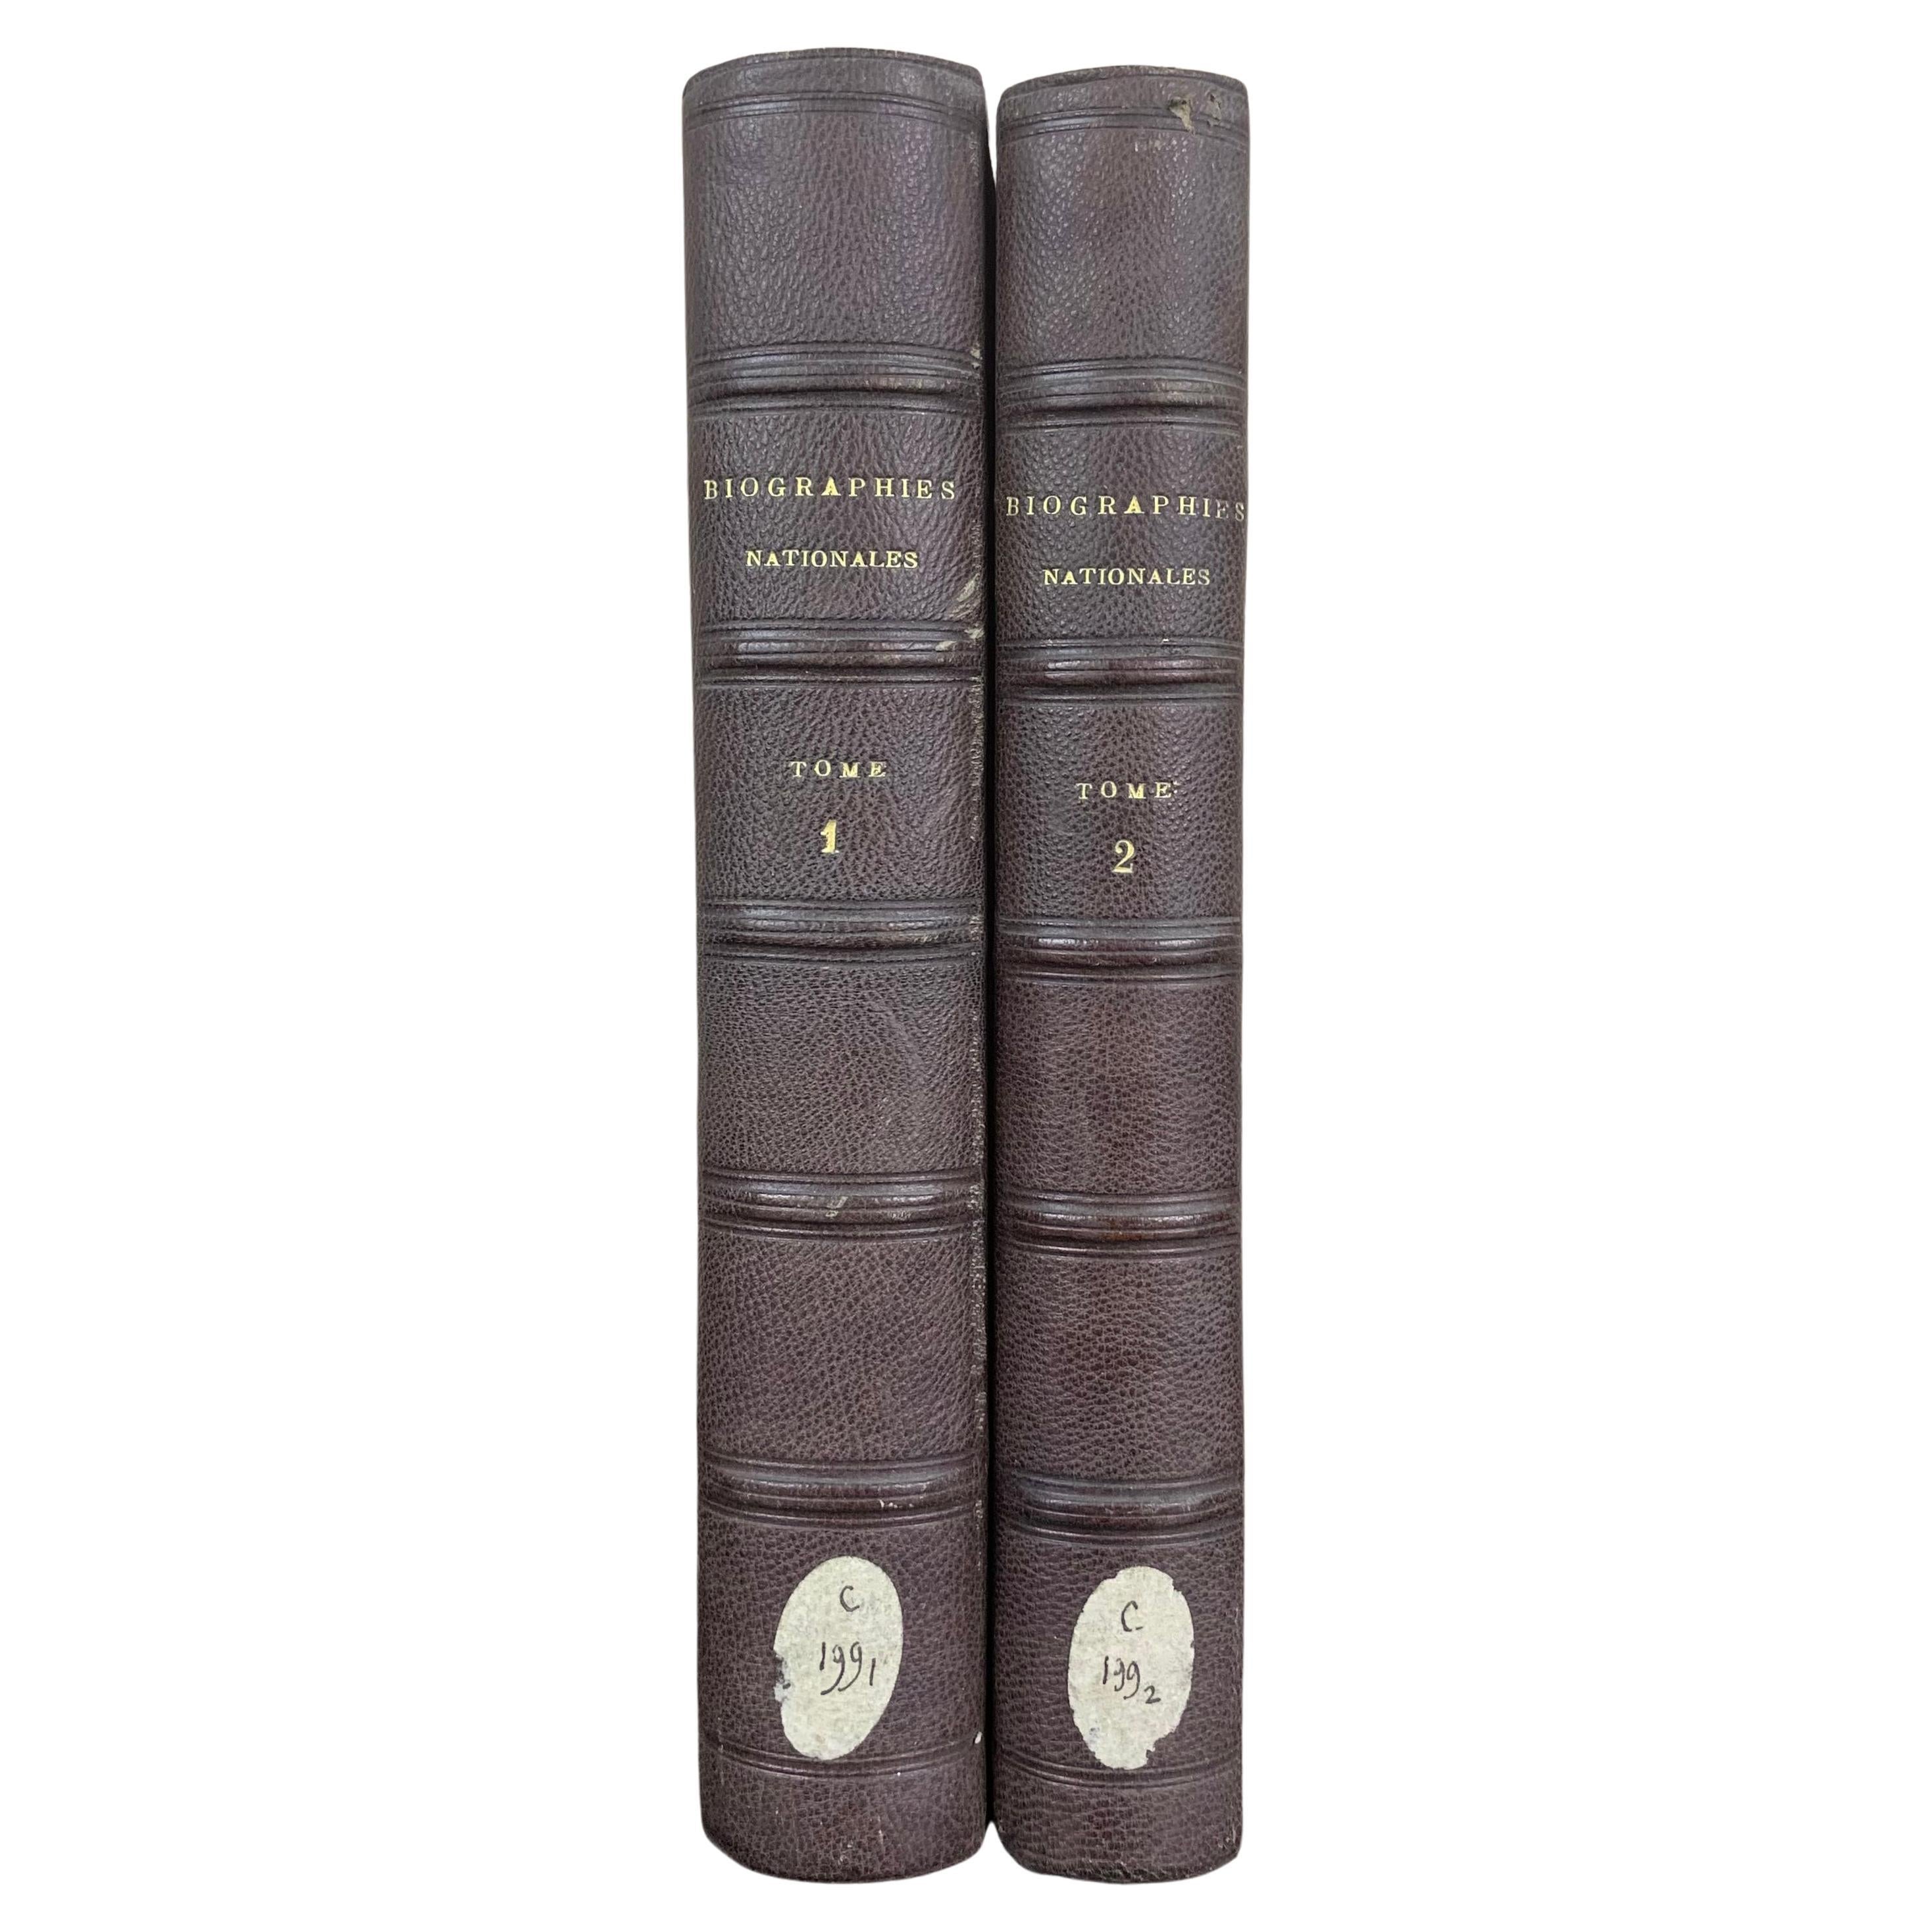 Pair of Old Books « National Biographies » from the 19th Century France 